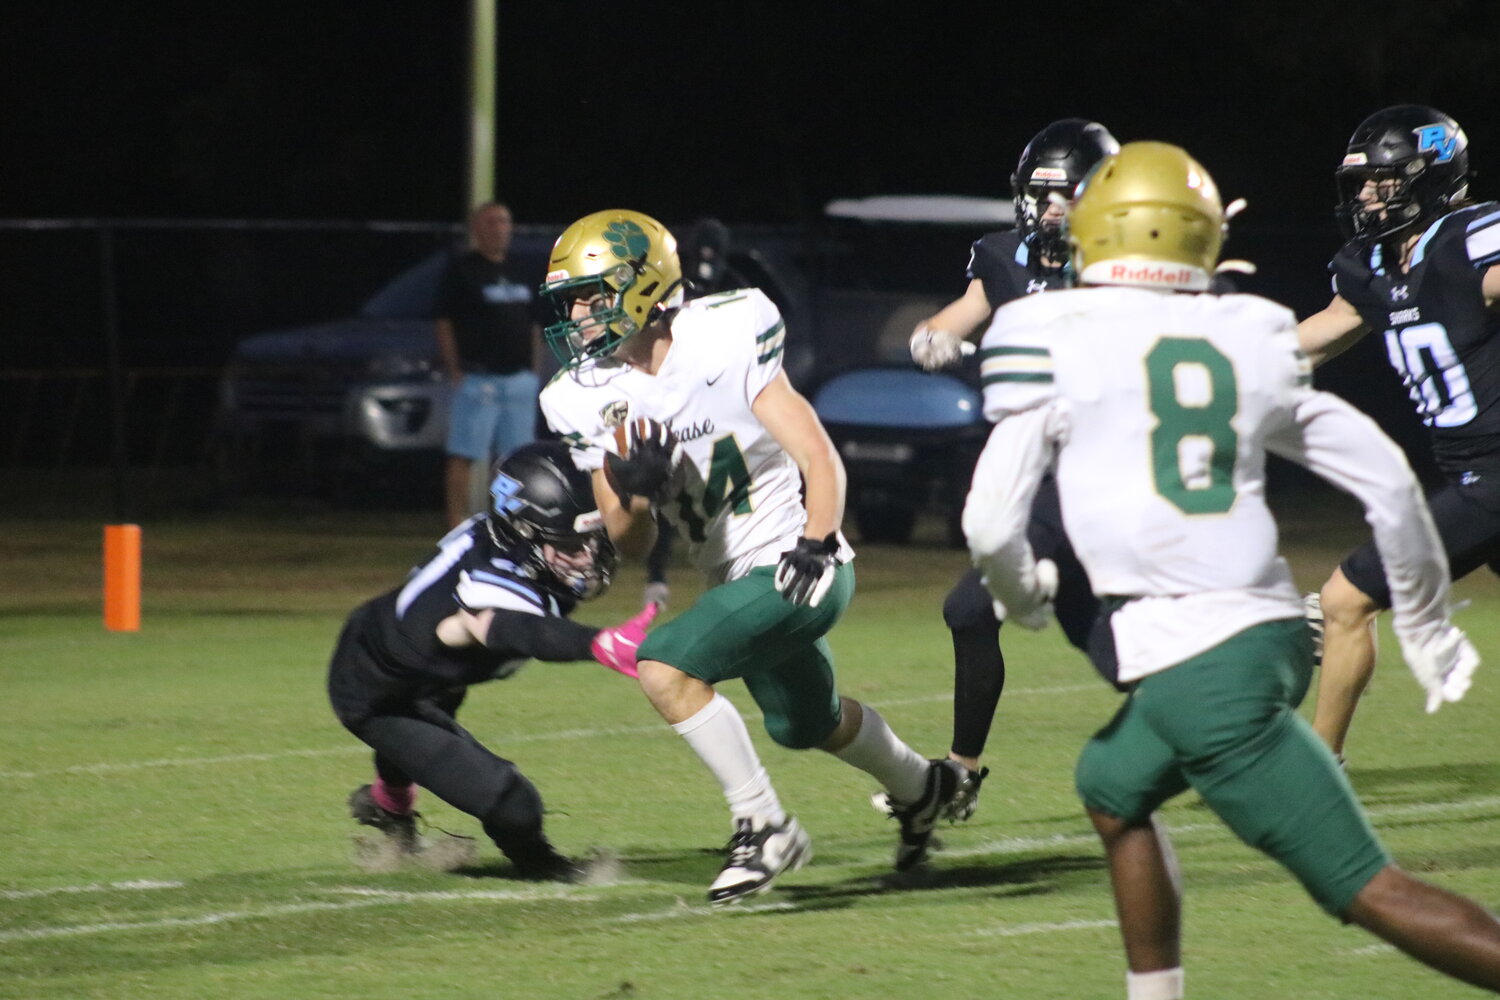 Maddox Spencer and the rest of the Nease wide receivers are keys to the offensive production.